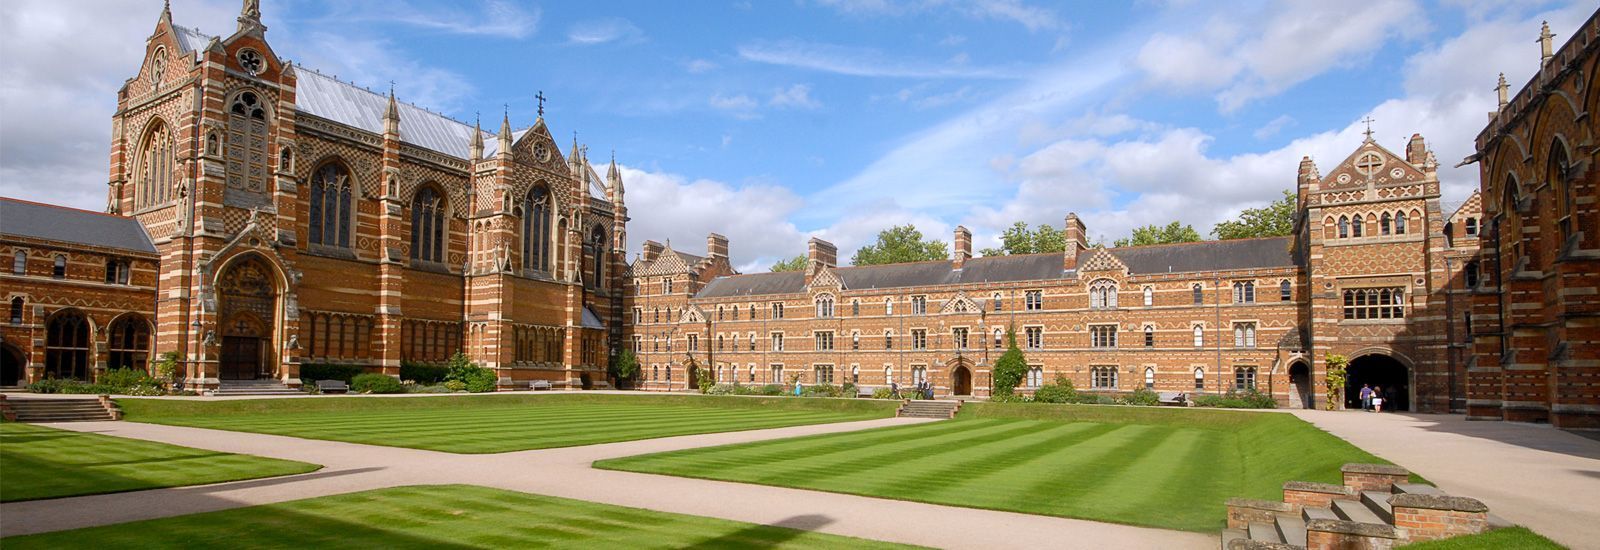 MEL Science - Keble College Oxford